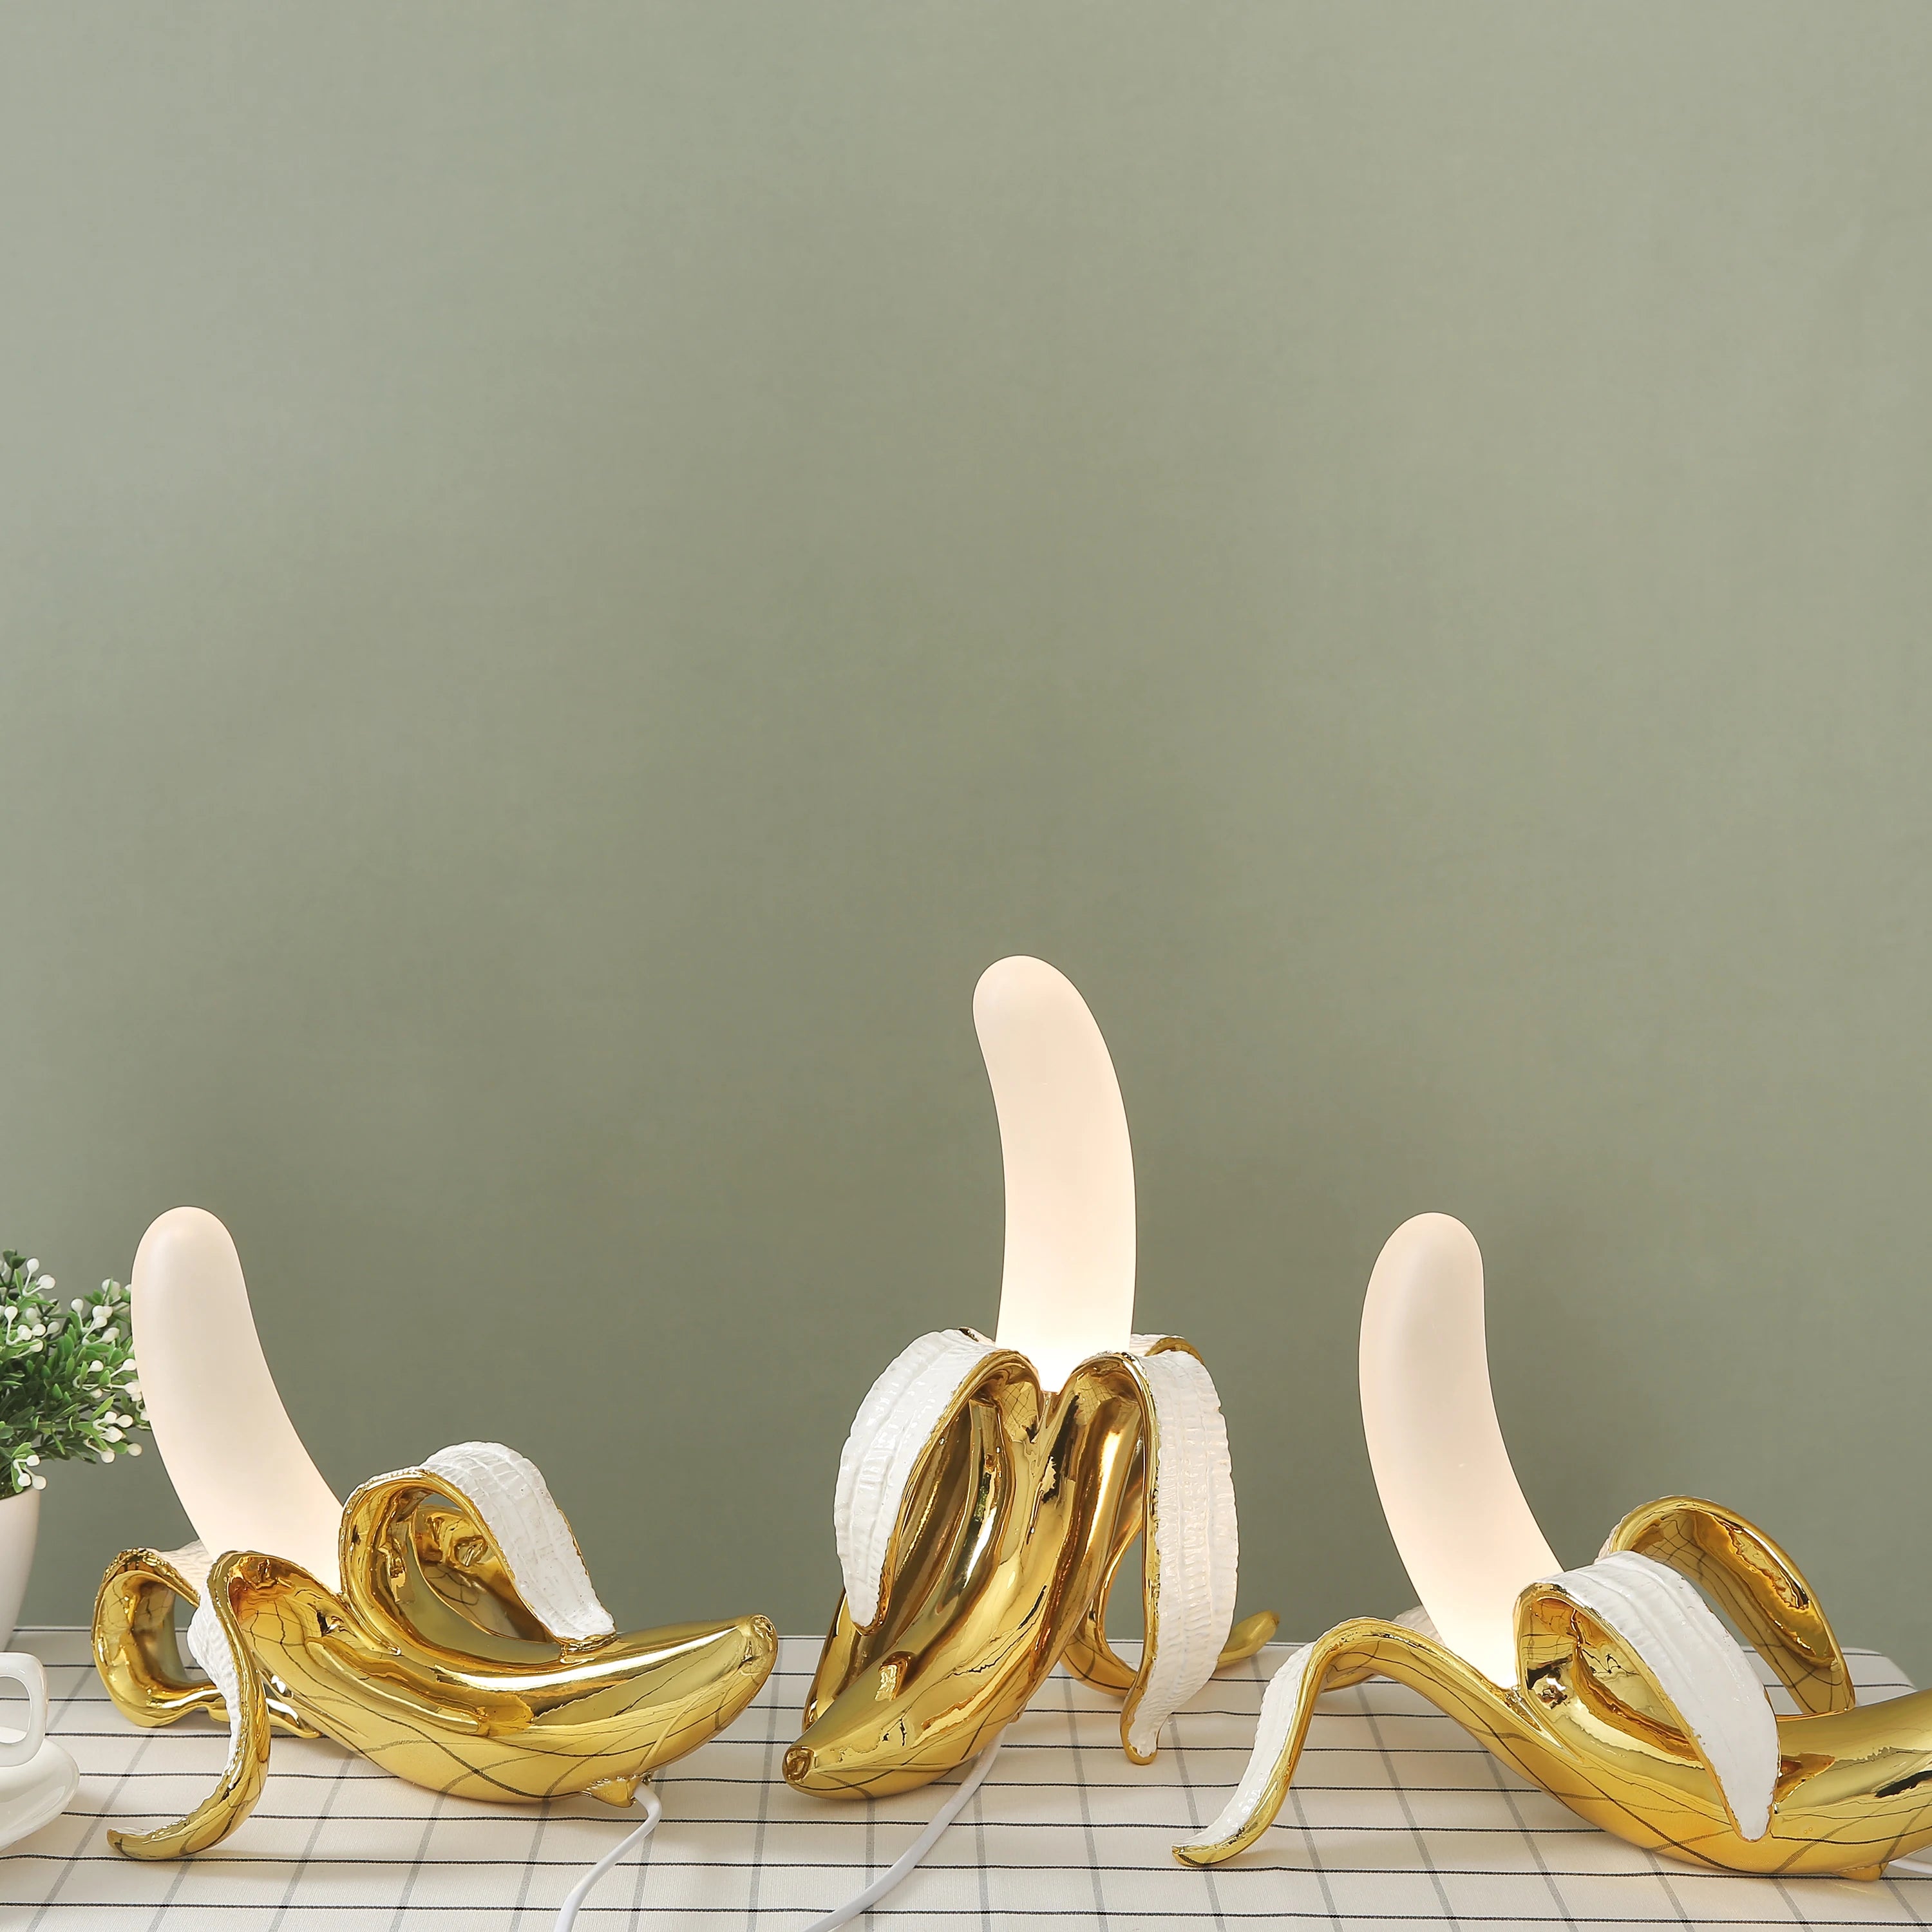 Golden banana peel table lamps emitting soft light on a table against a green wall, creating a cozy atmosphere.